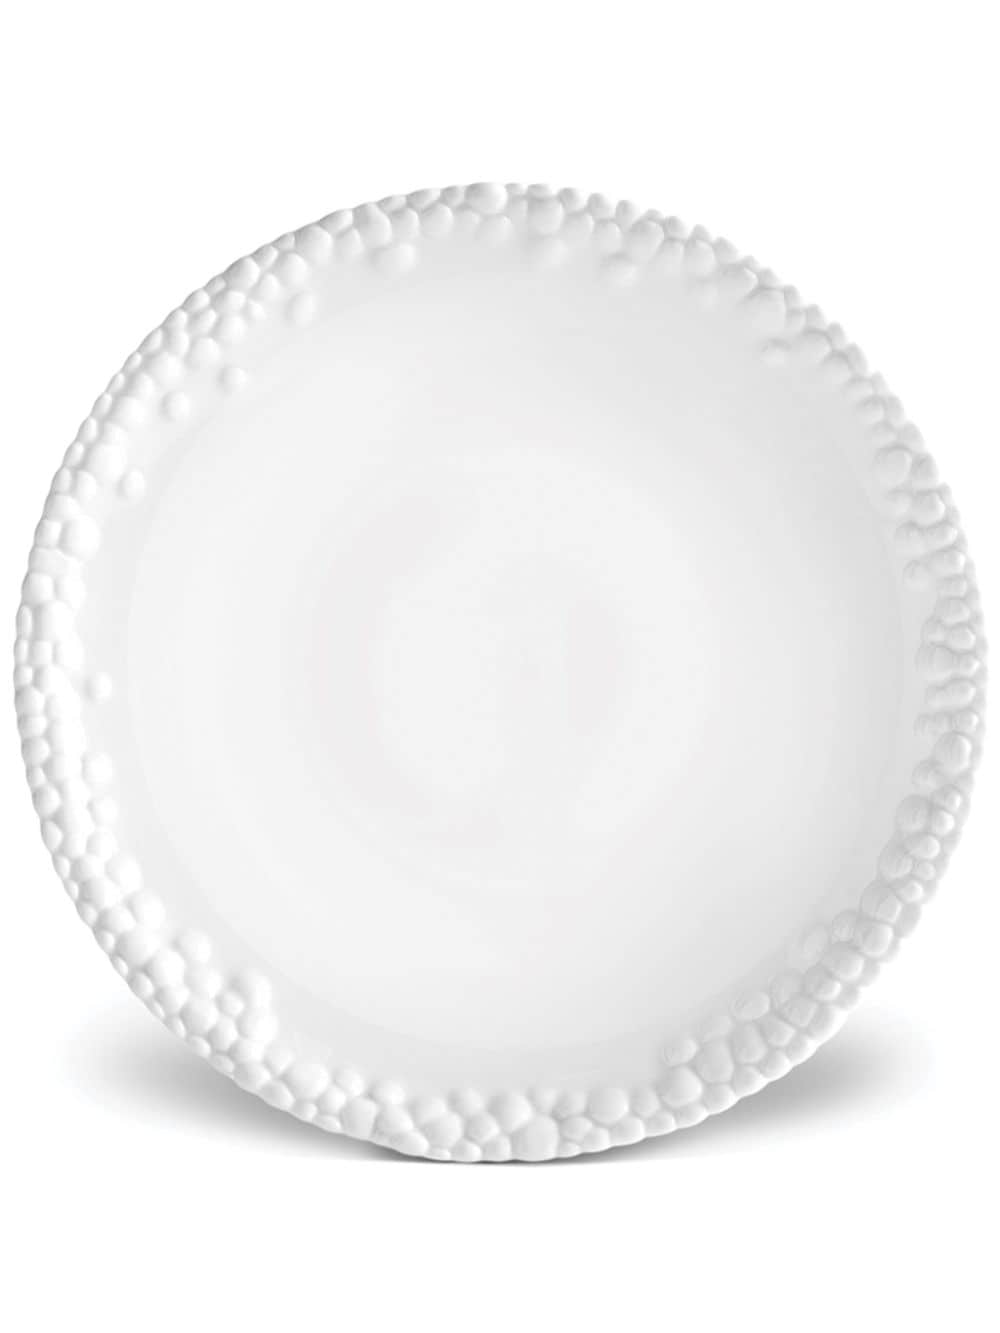 L'Objet x Haas Borthers Mojave bread and butter plate (17cm) - White von L'Objet